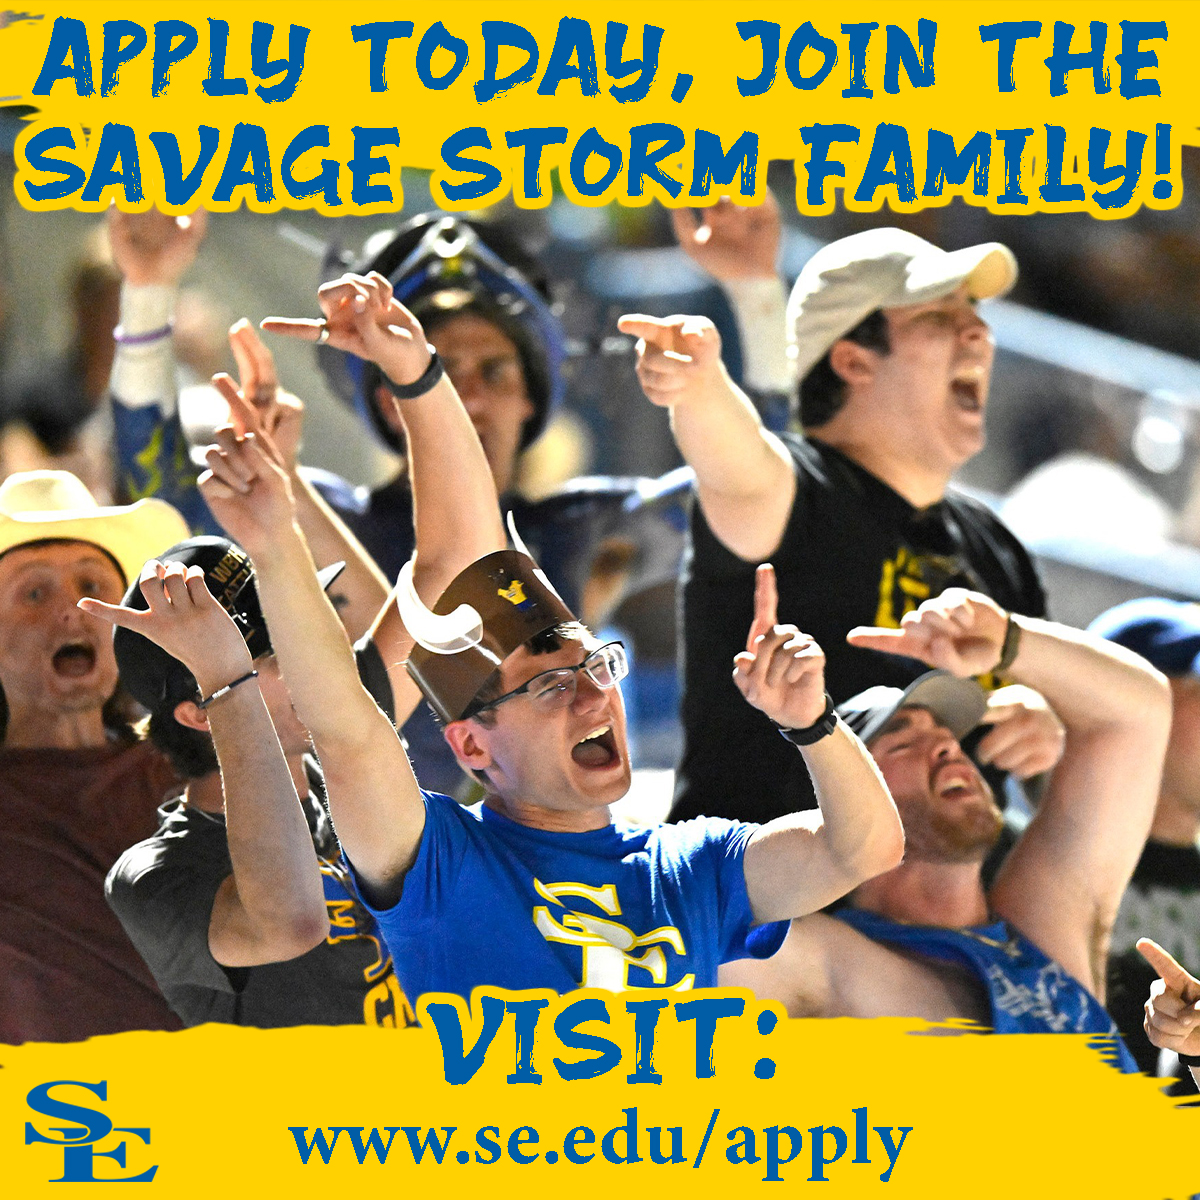 Have you applied to join the Savage Storm Family yet?⛈️⚡

Whether you're eager to chase your passion, explore new opportunities, or more, Southeastern has a path for everyone💙💛

Apply today by visiting: SE.edu/apply

#YourFutureStartsHere | #ApplyToday